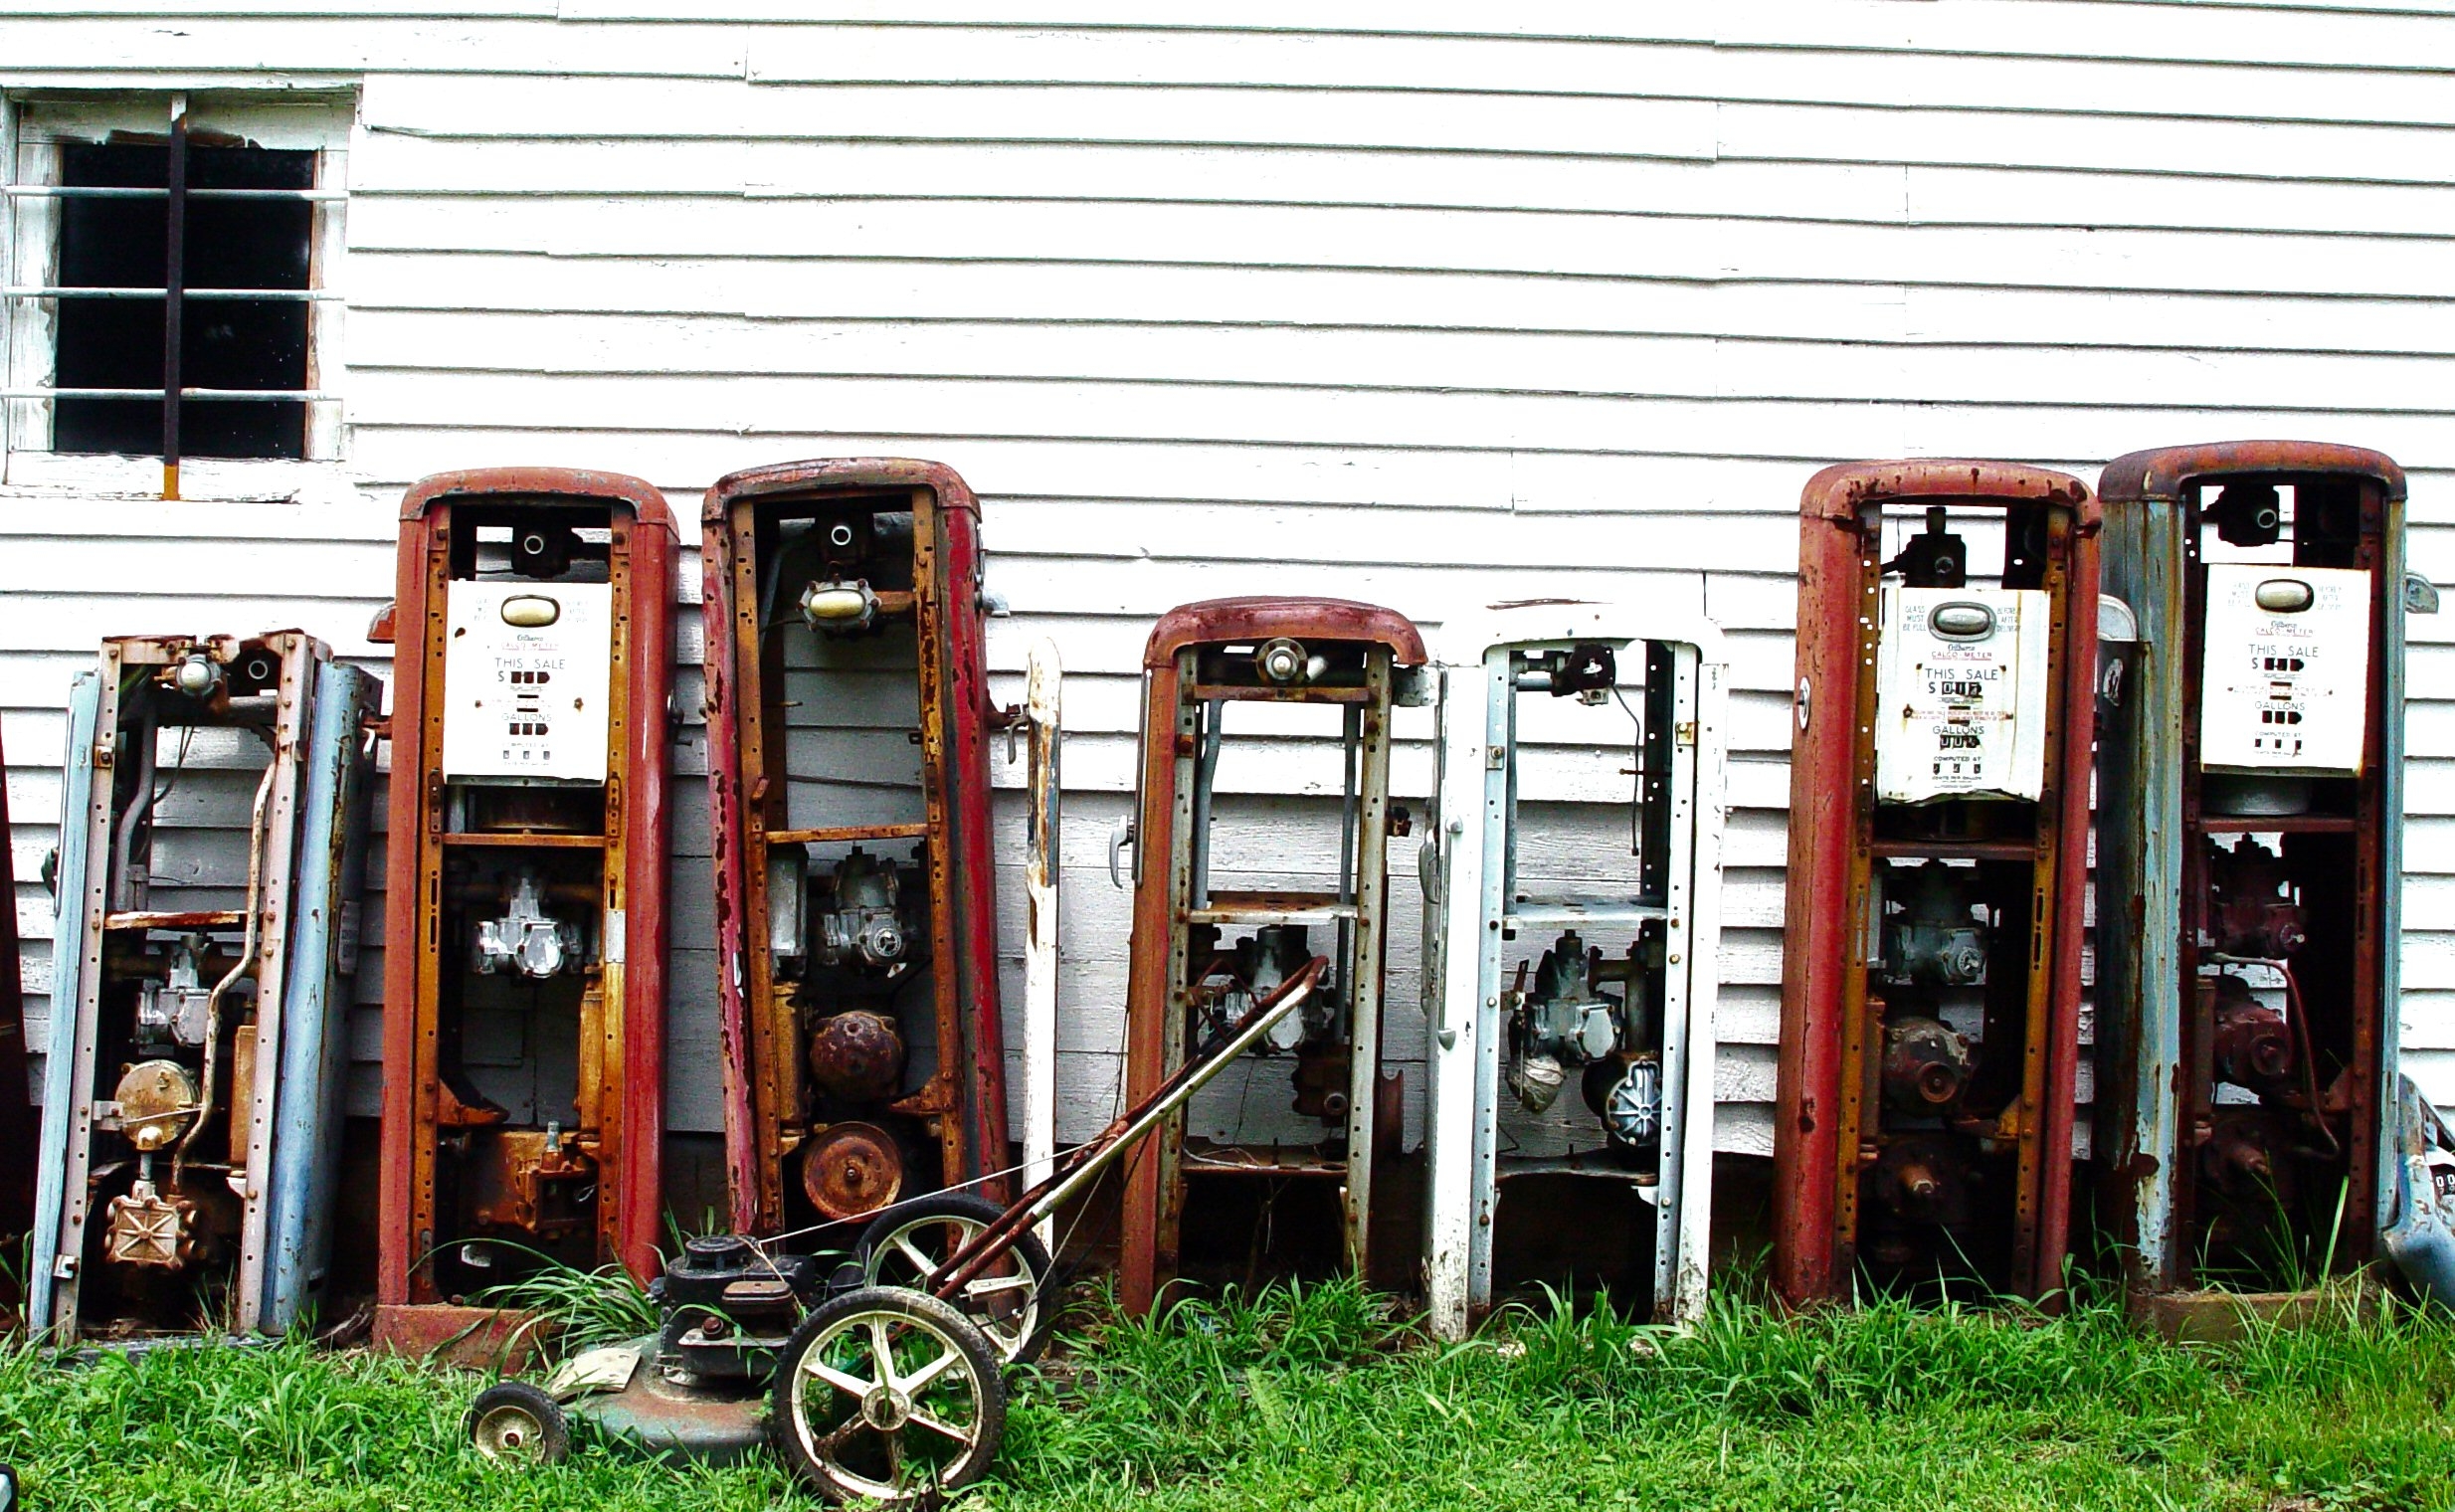 Old gas pumps